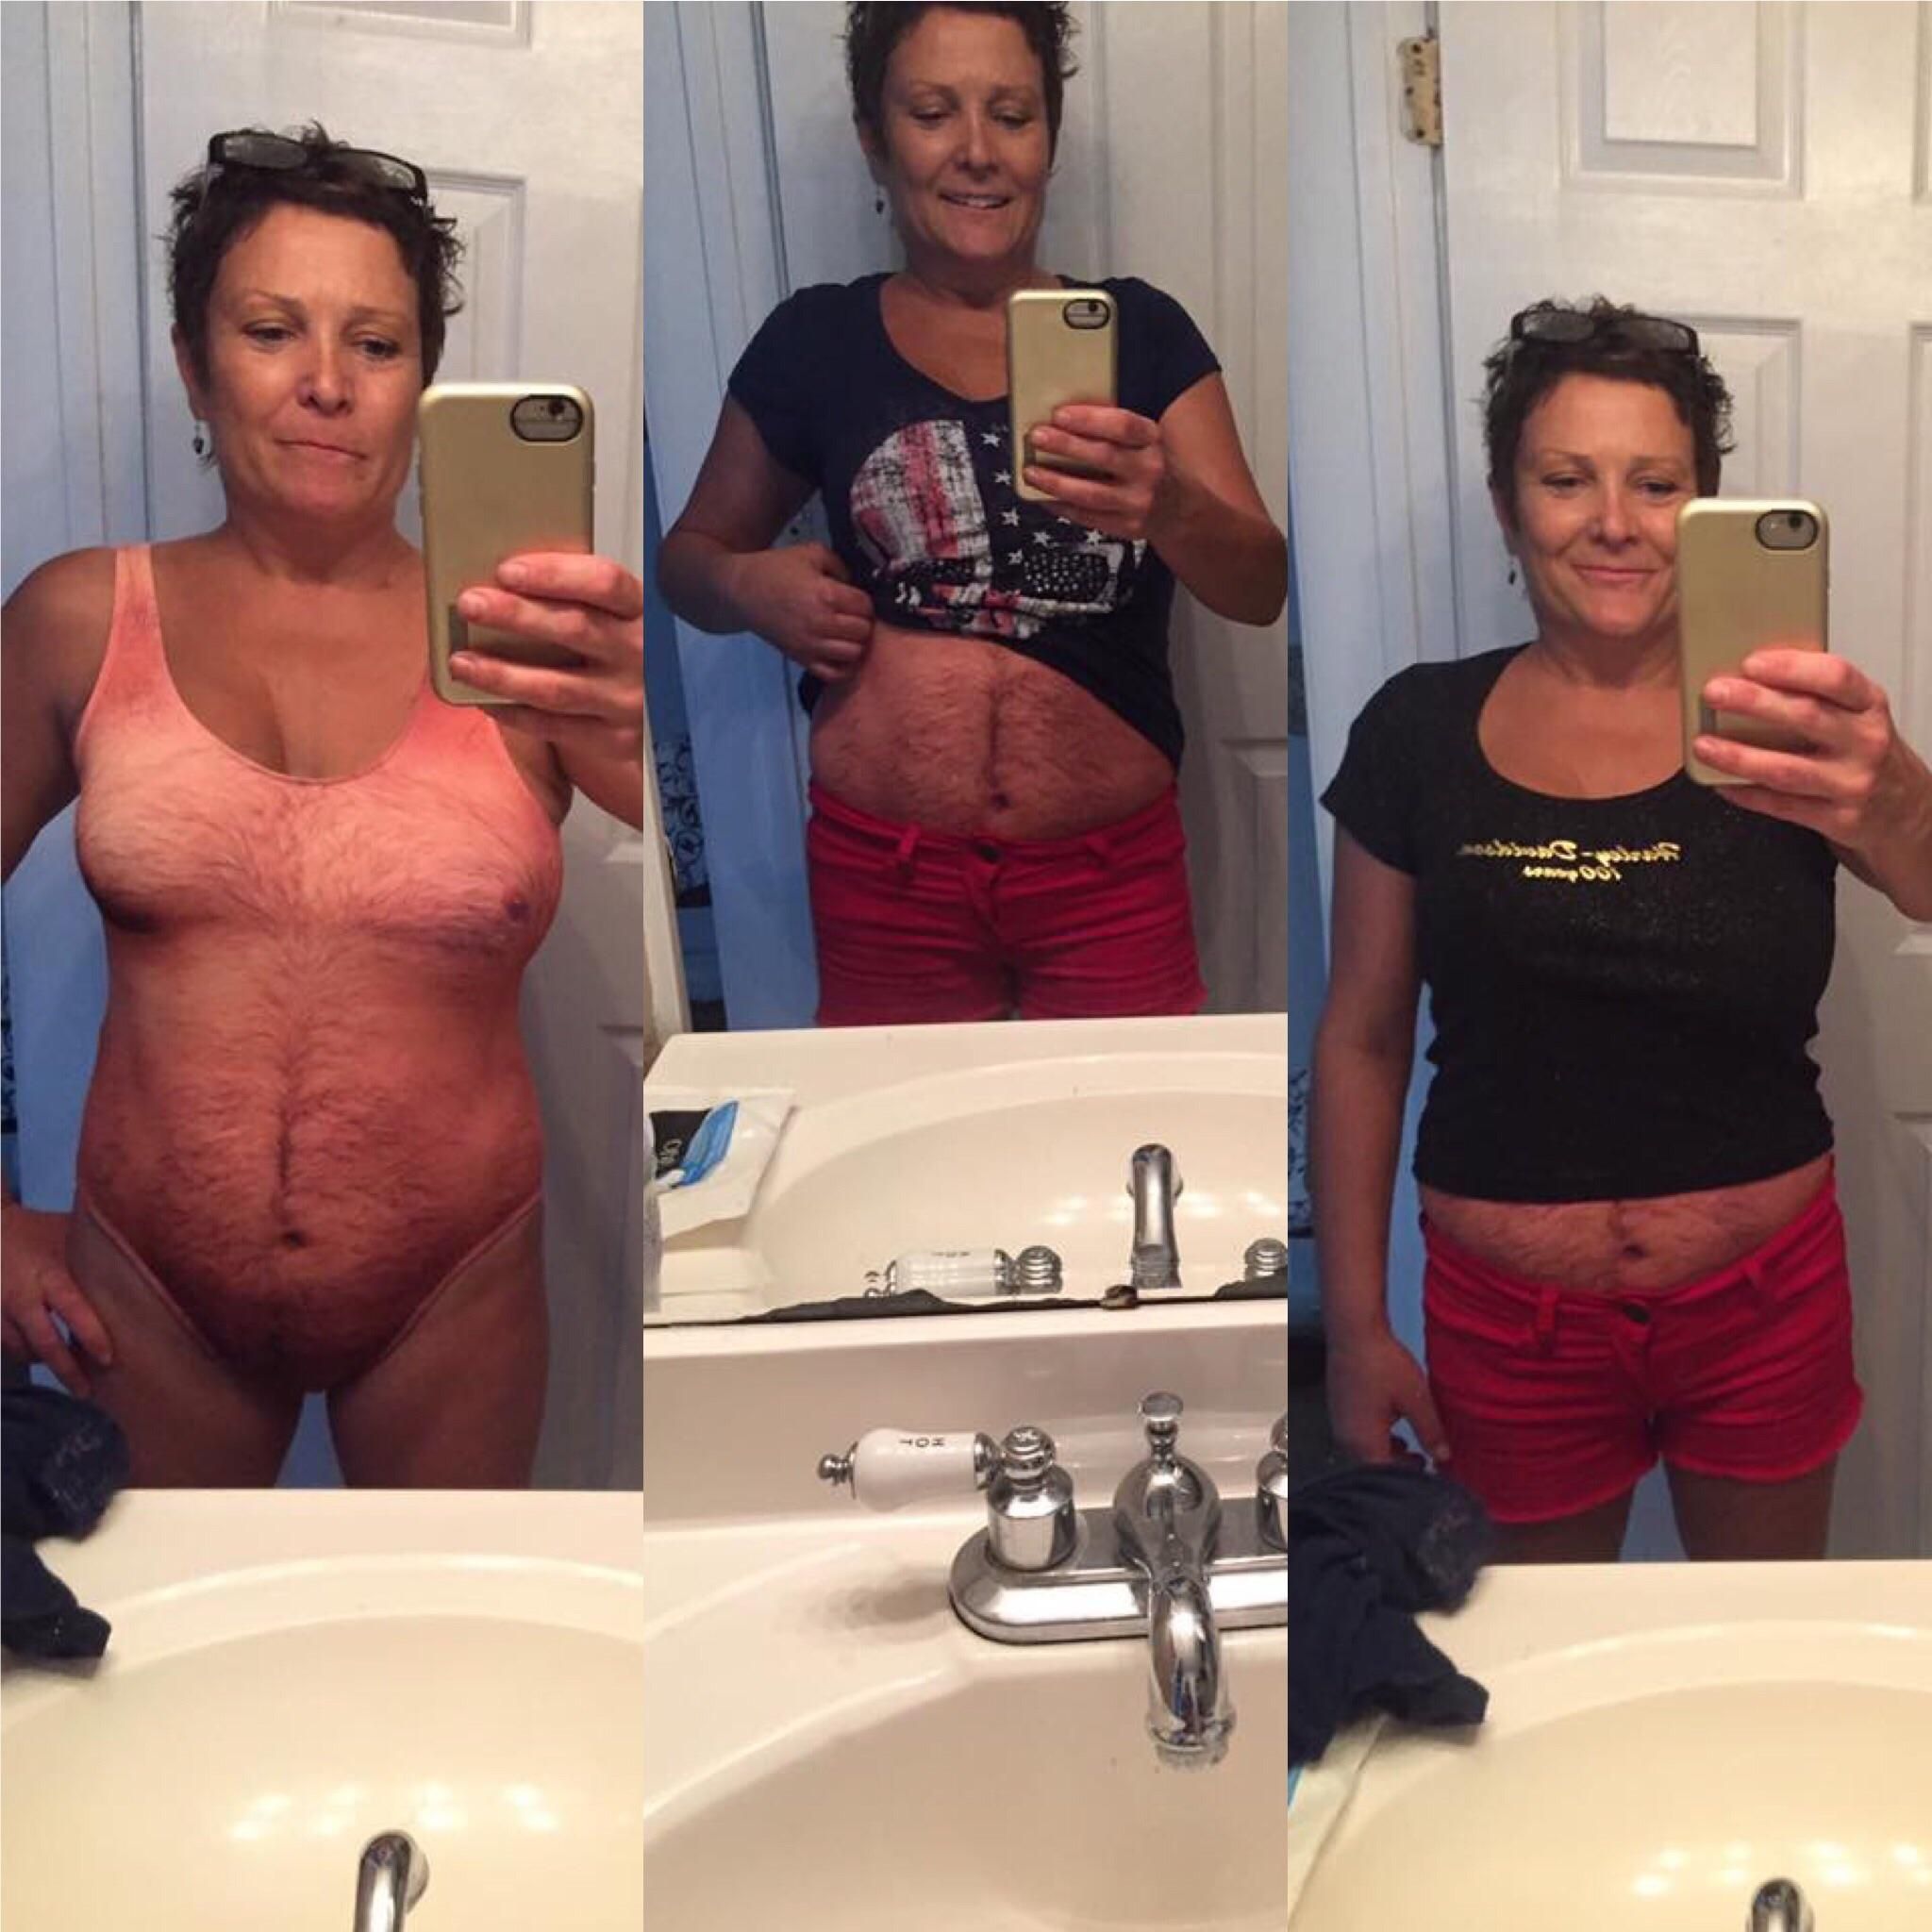 This mother decided to wear her bathing suit as a bodysuit.